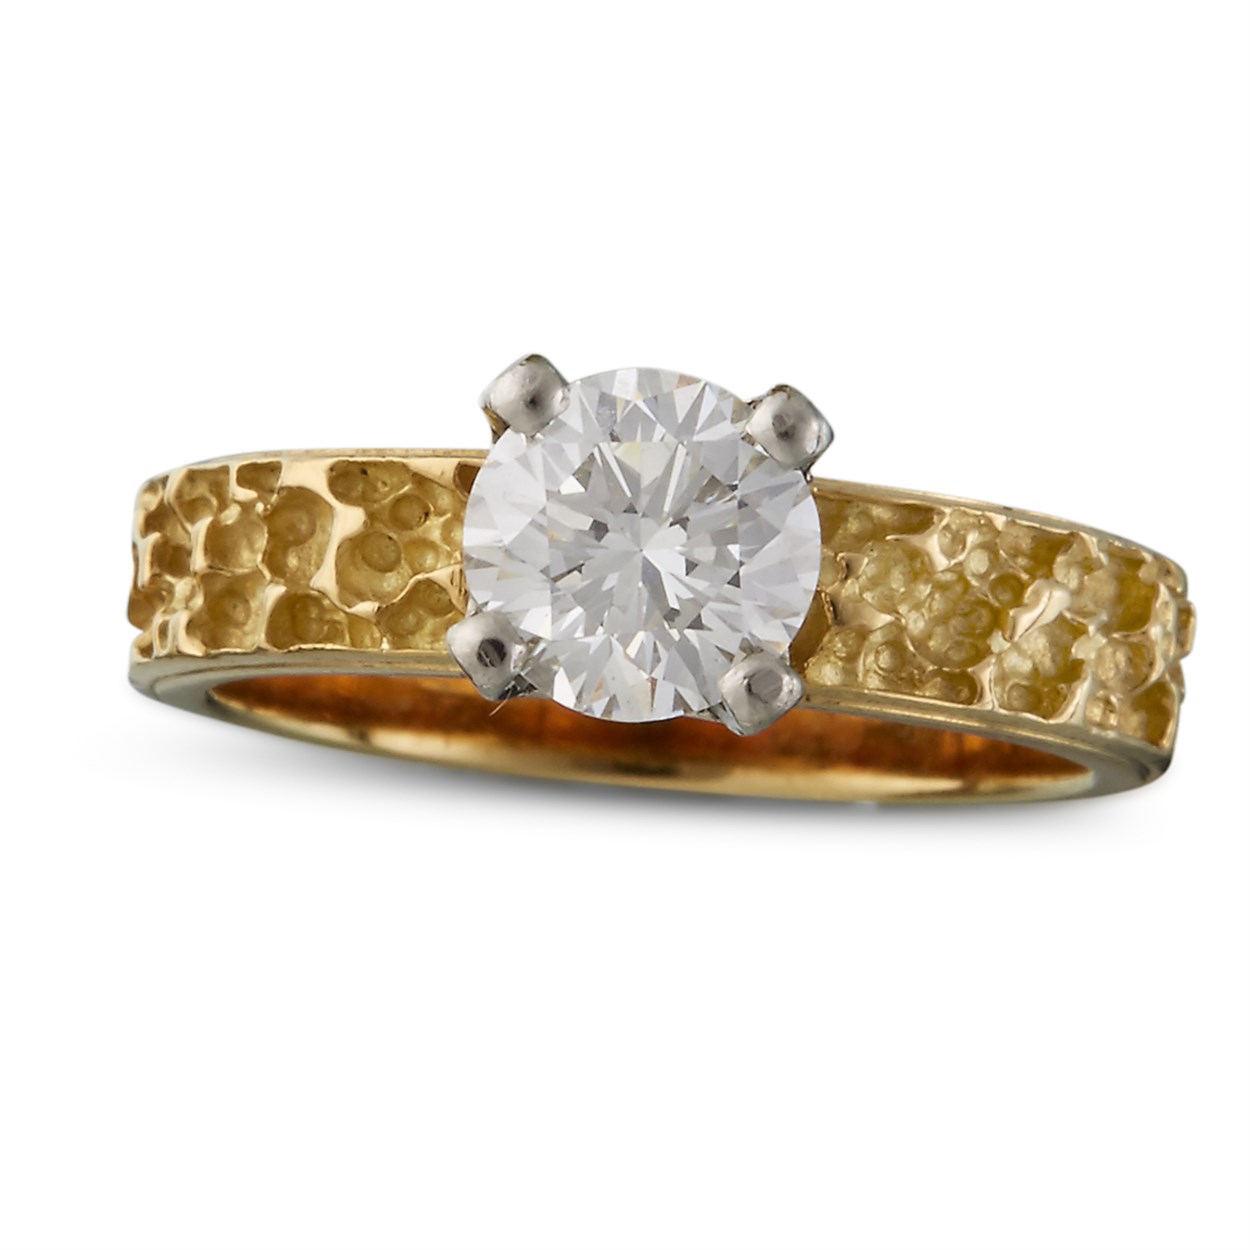 Lot 89 - A diamond solitaire ring